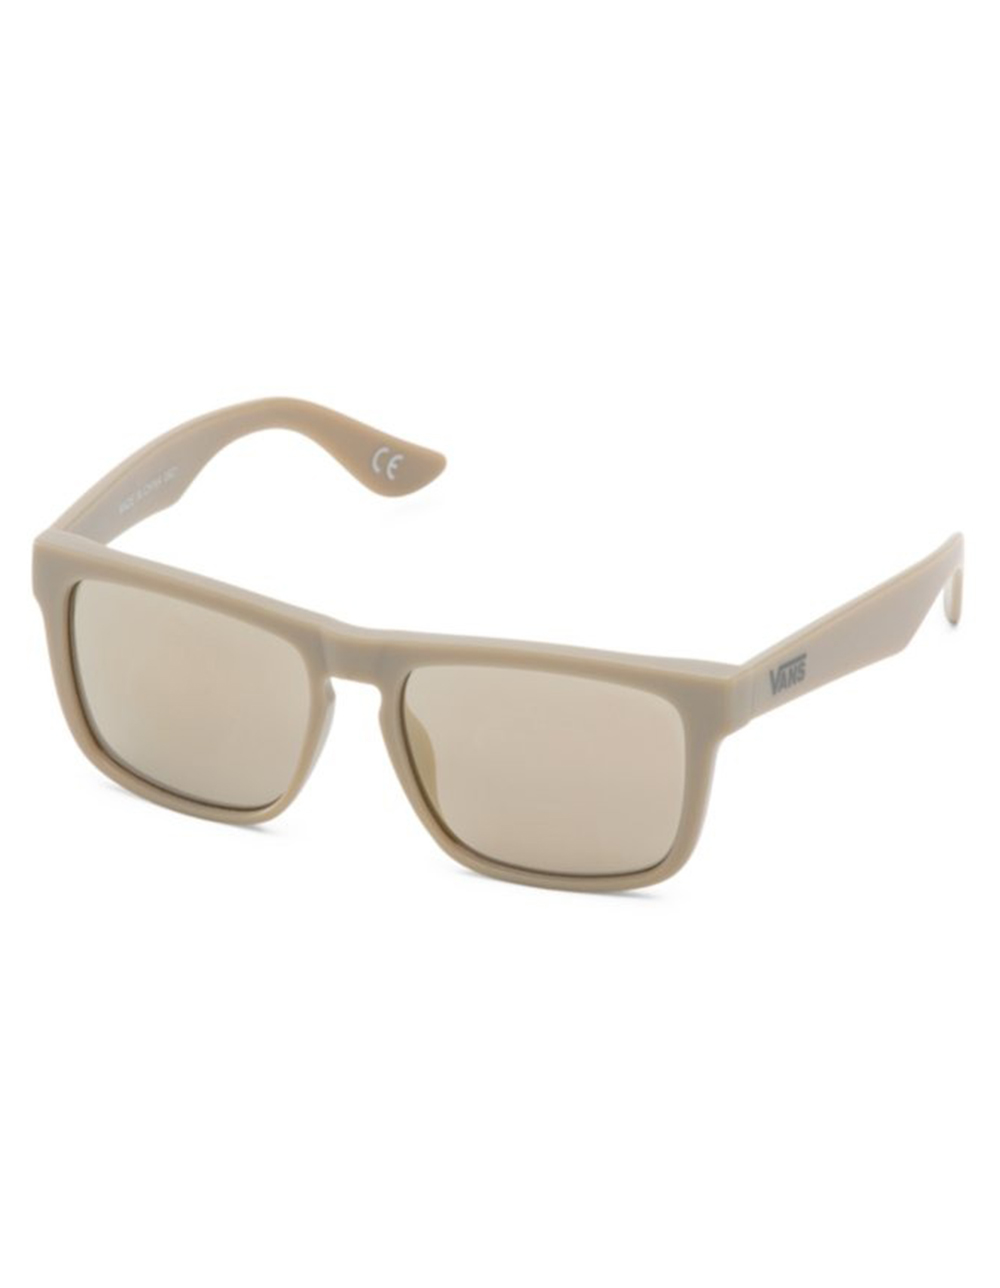 VANS Squared Off Sunglasses - TAUPE | Tillys